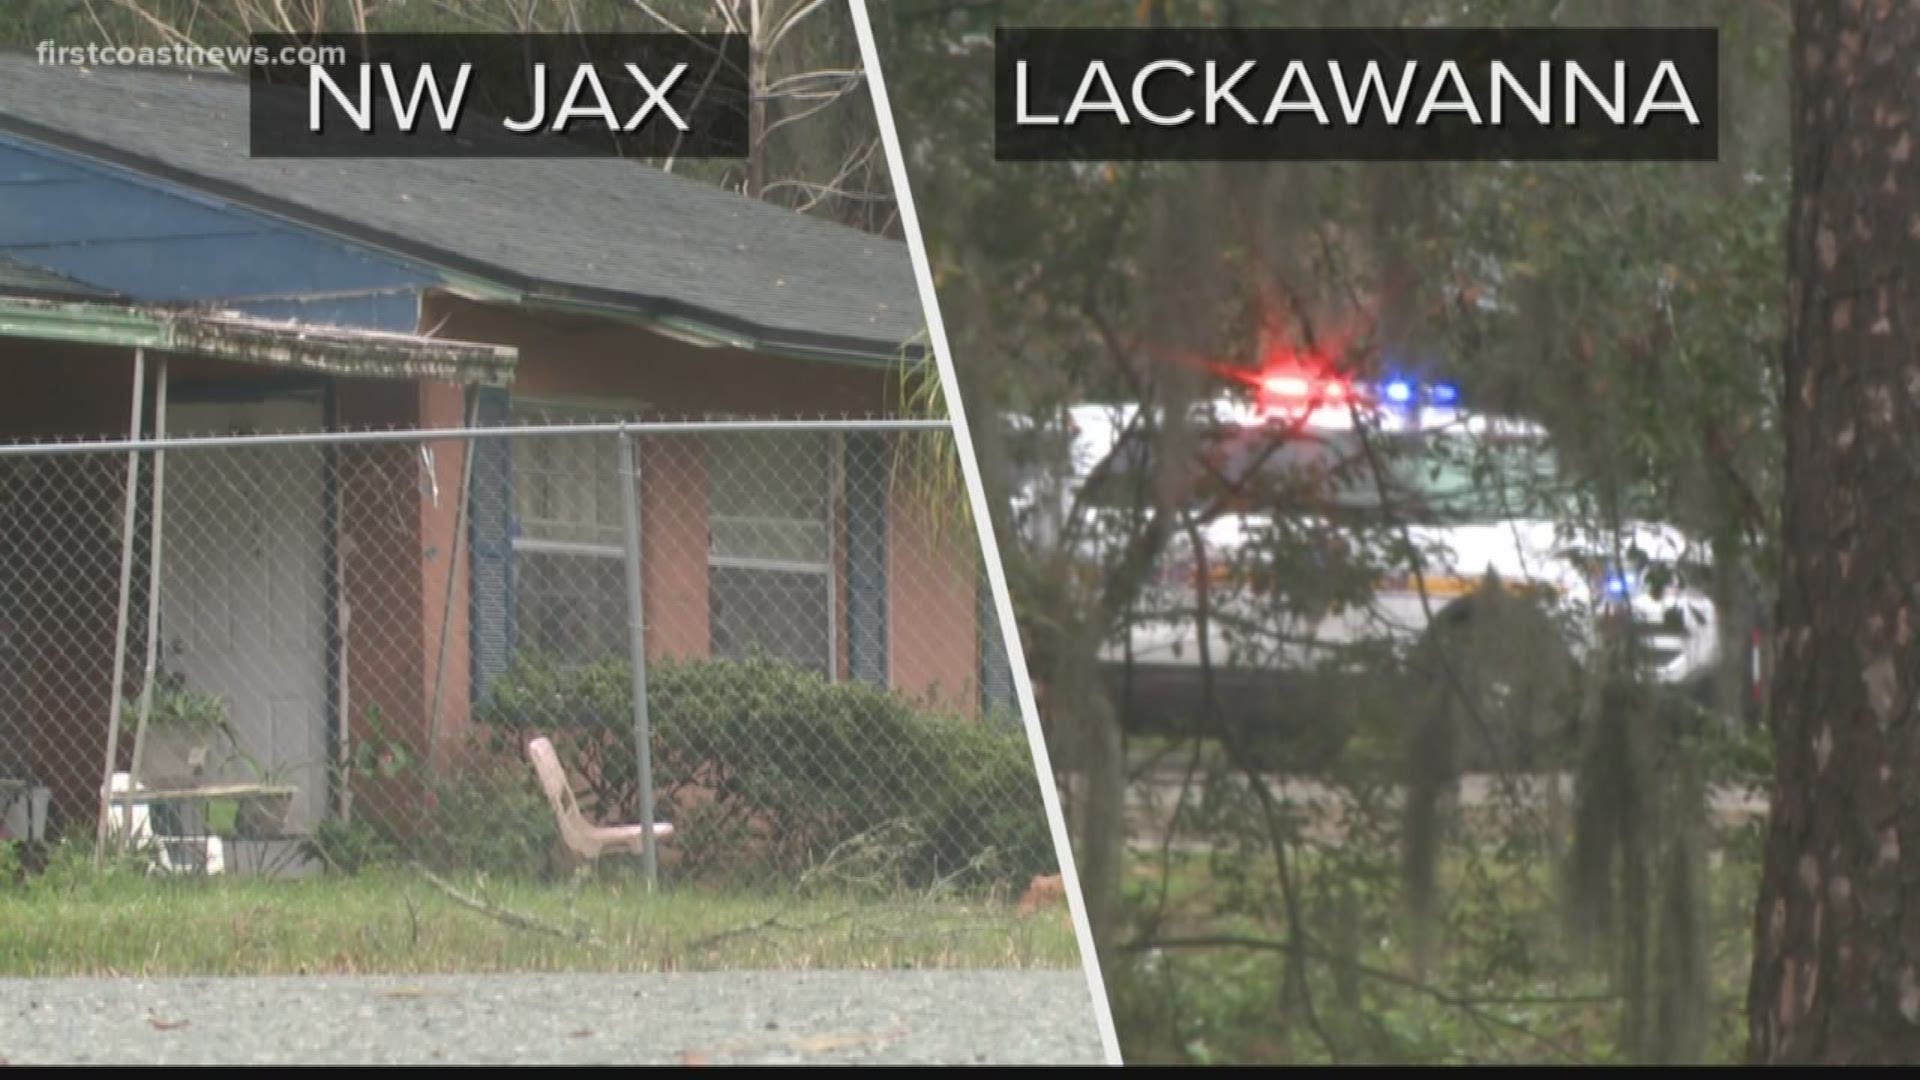 A teen and two children are among those injured in two separate shootings that took place in Jacksonville.